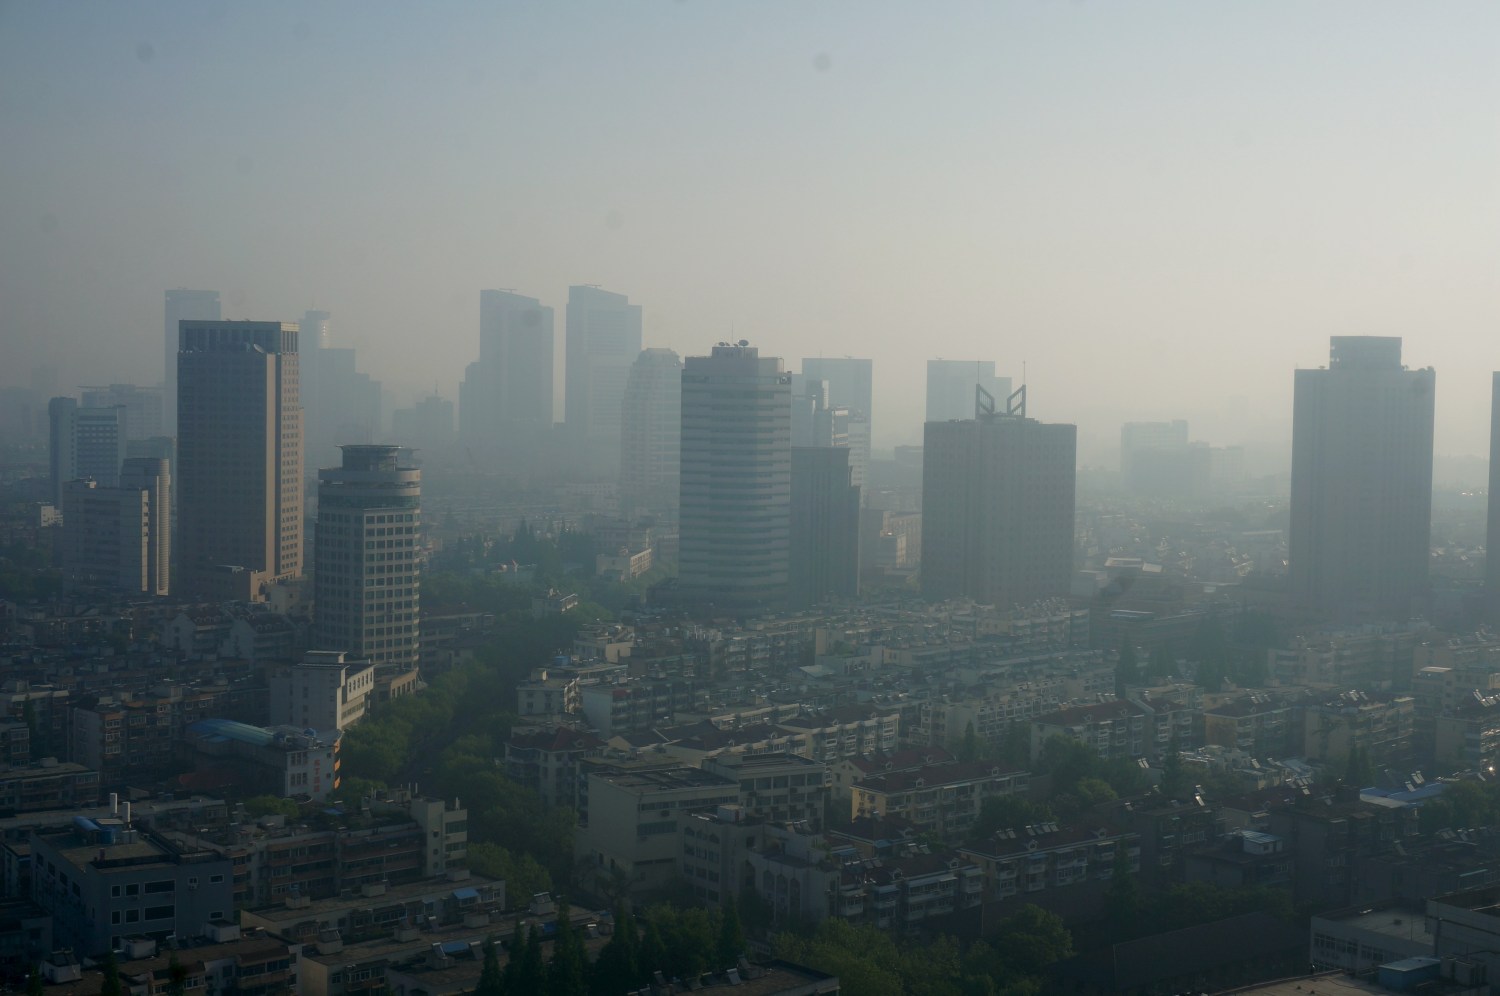 Buildings are seen during a moderately polluted day in Nanjing, Jiangsu Province, China